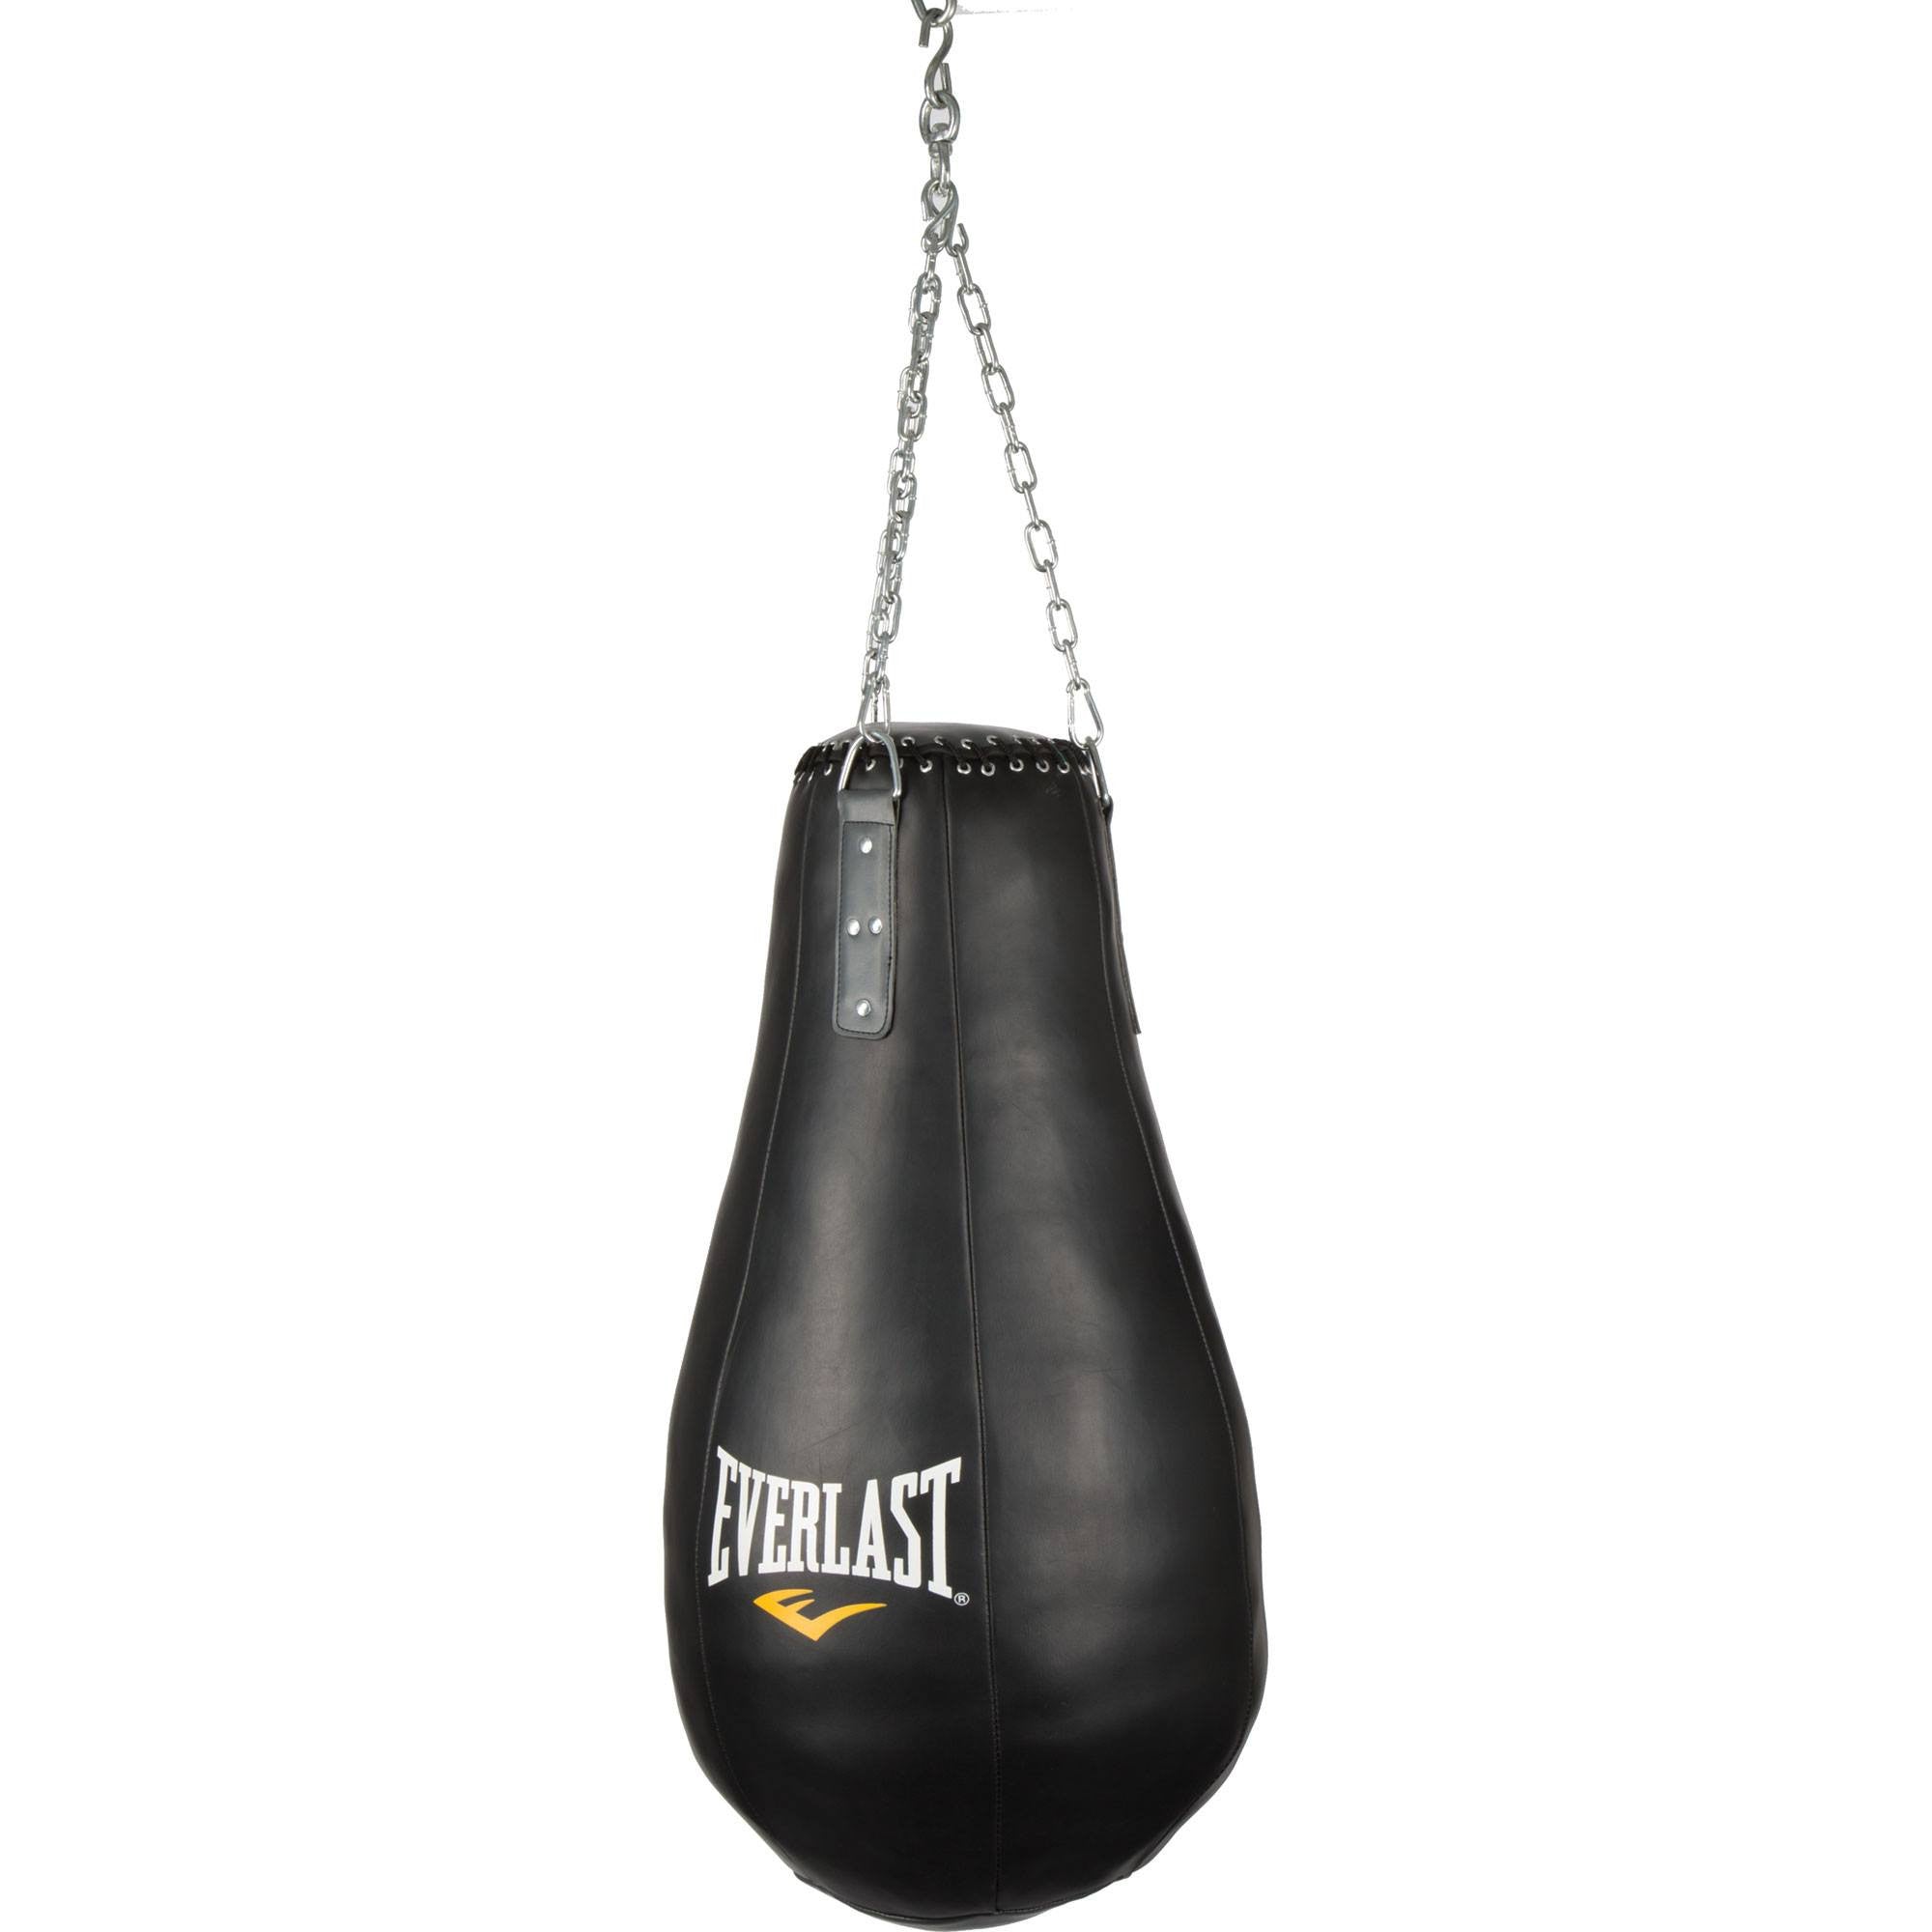 Heavy Bag Stands & Hangers: Quality Heavy Bag Stands : ProFightShop.com